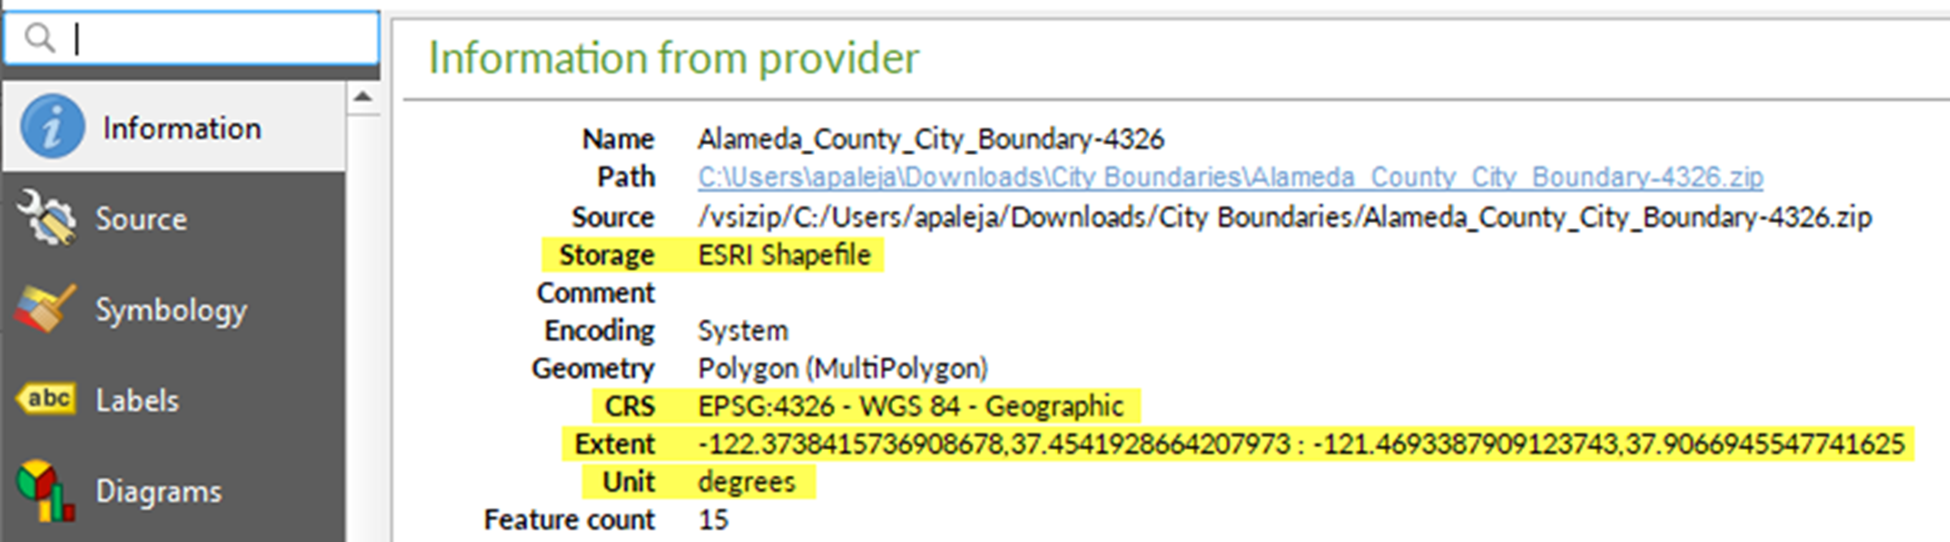 QGIS information screen with highlighted values